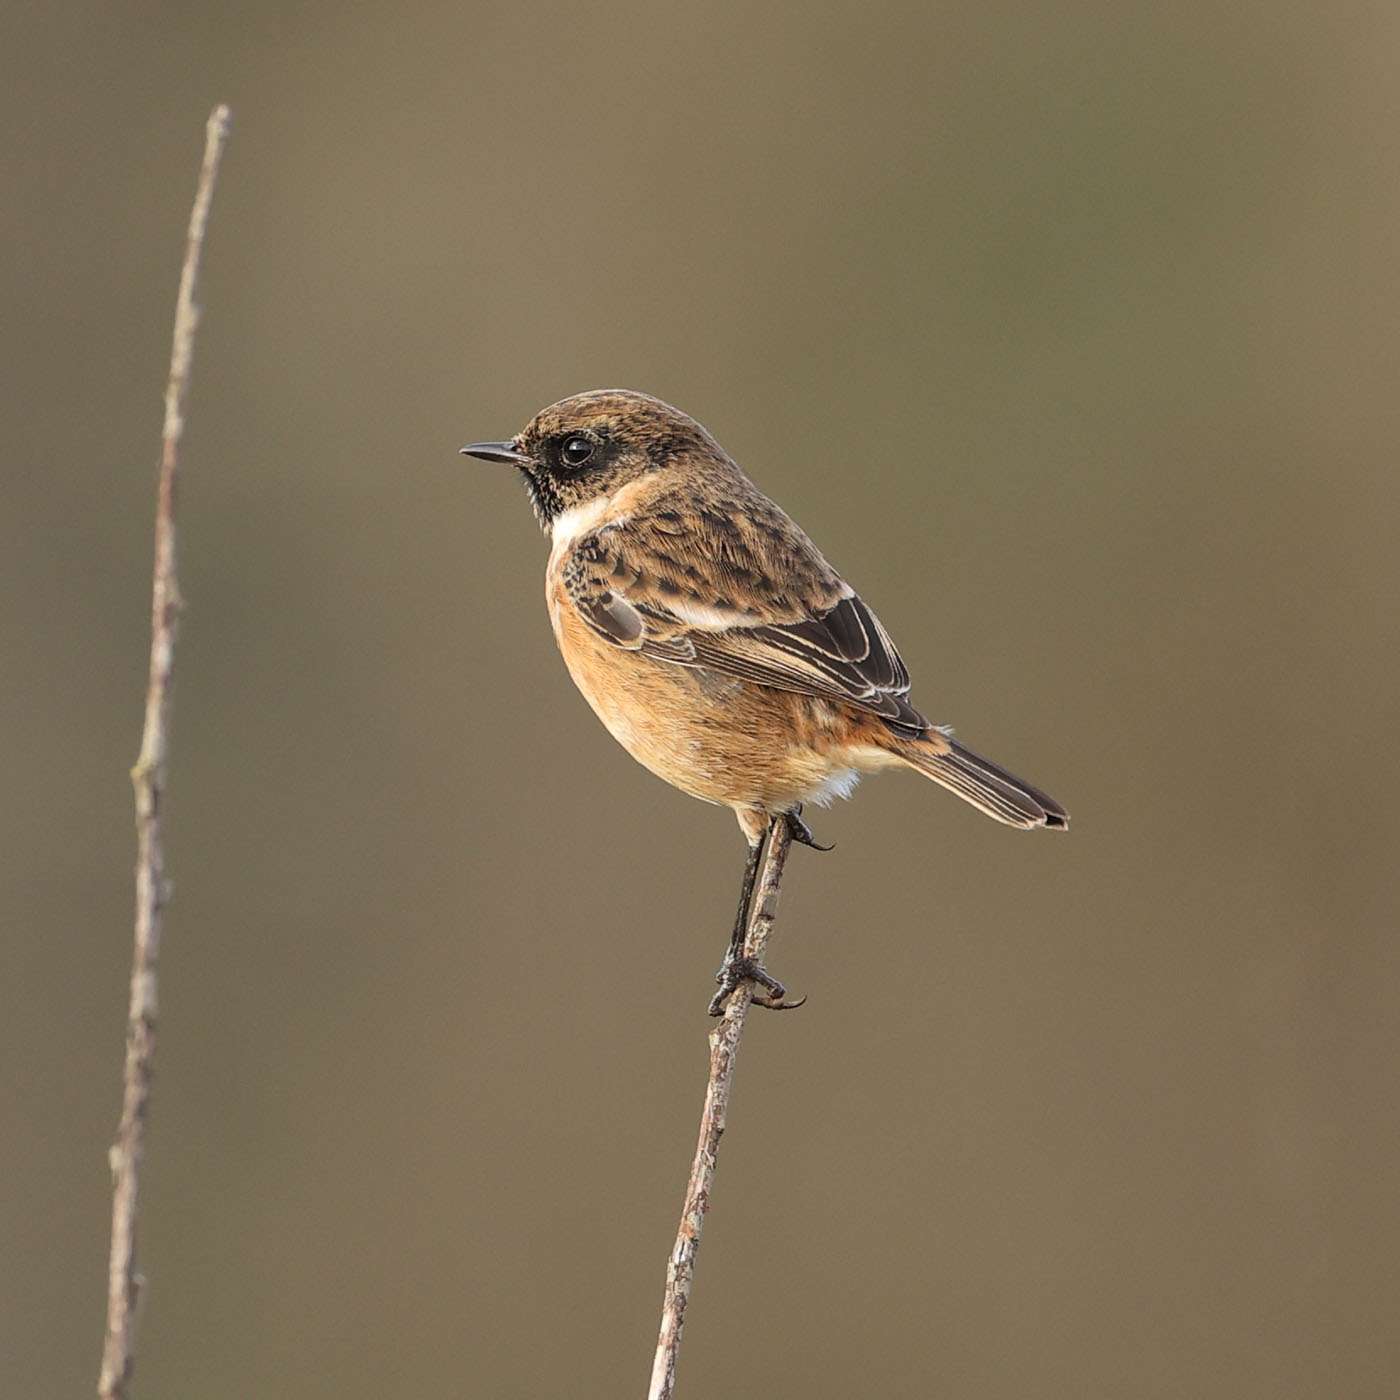 Stonechat by Steve Hopper at Broadsands